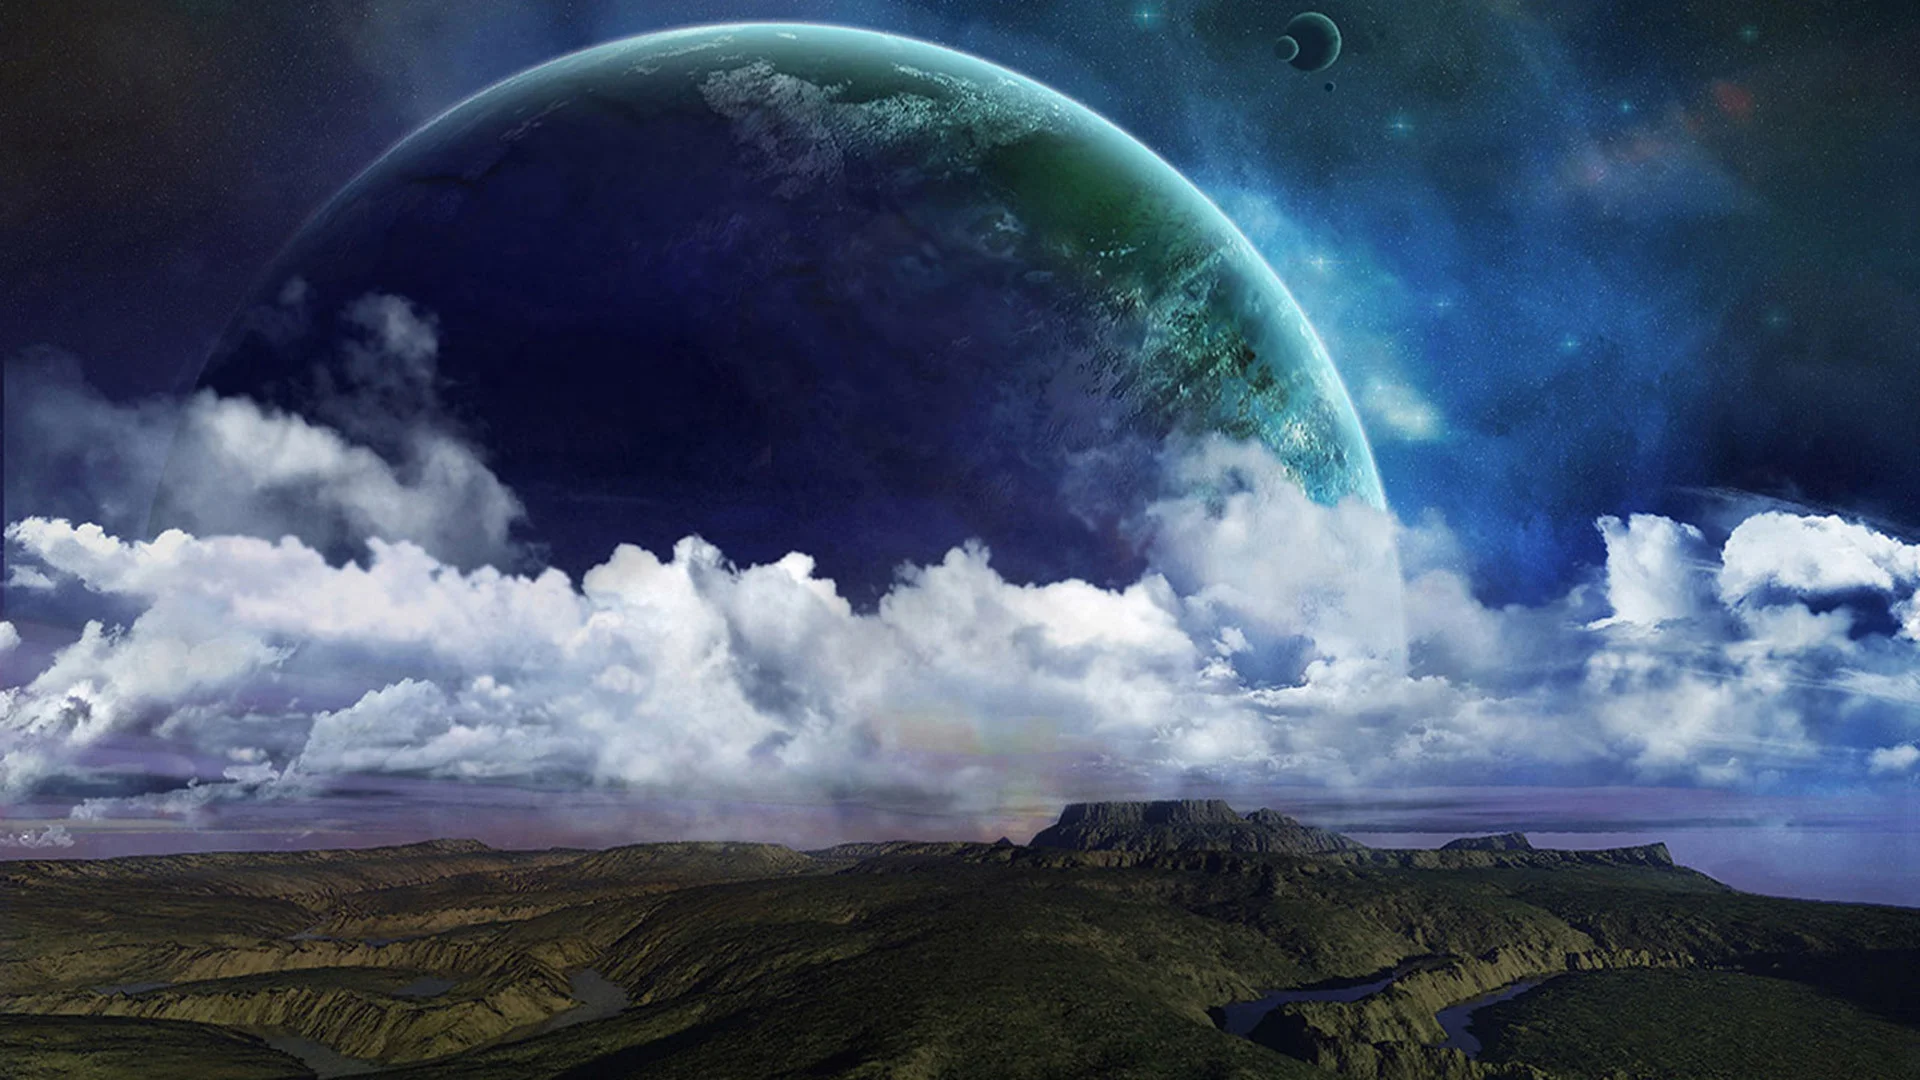 Fantasy Space Art Free Desktop Wallpapers for Widescreen, HD and Mobile